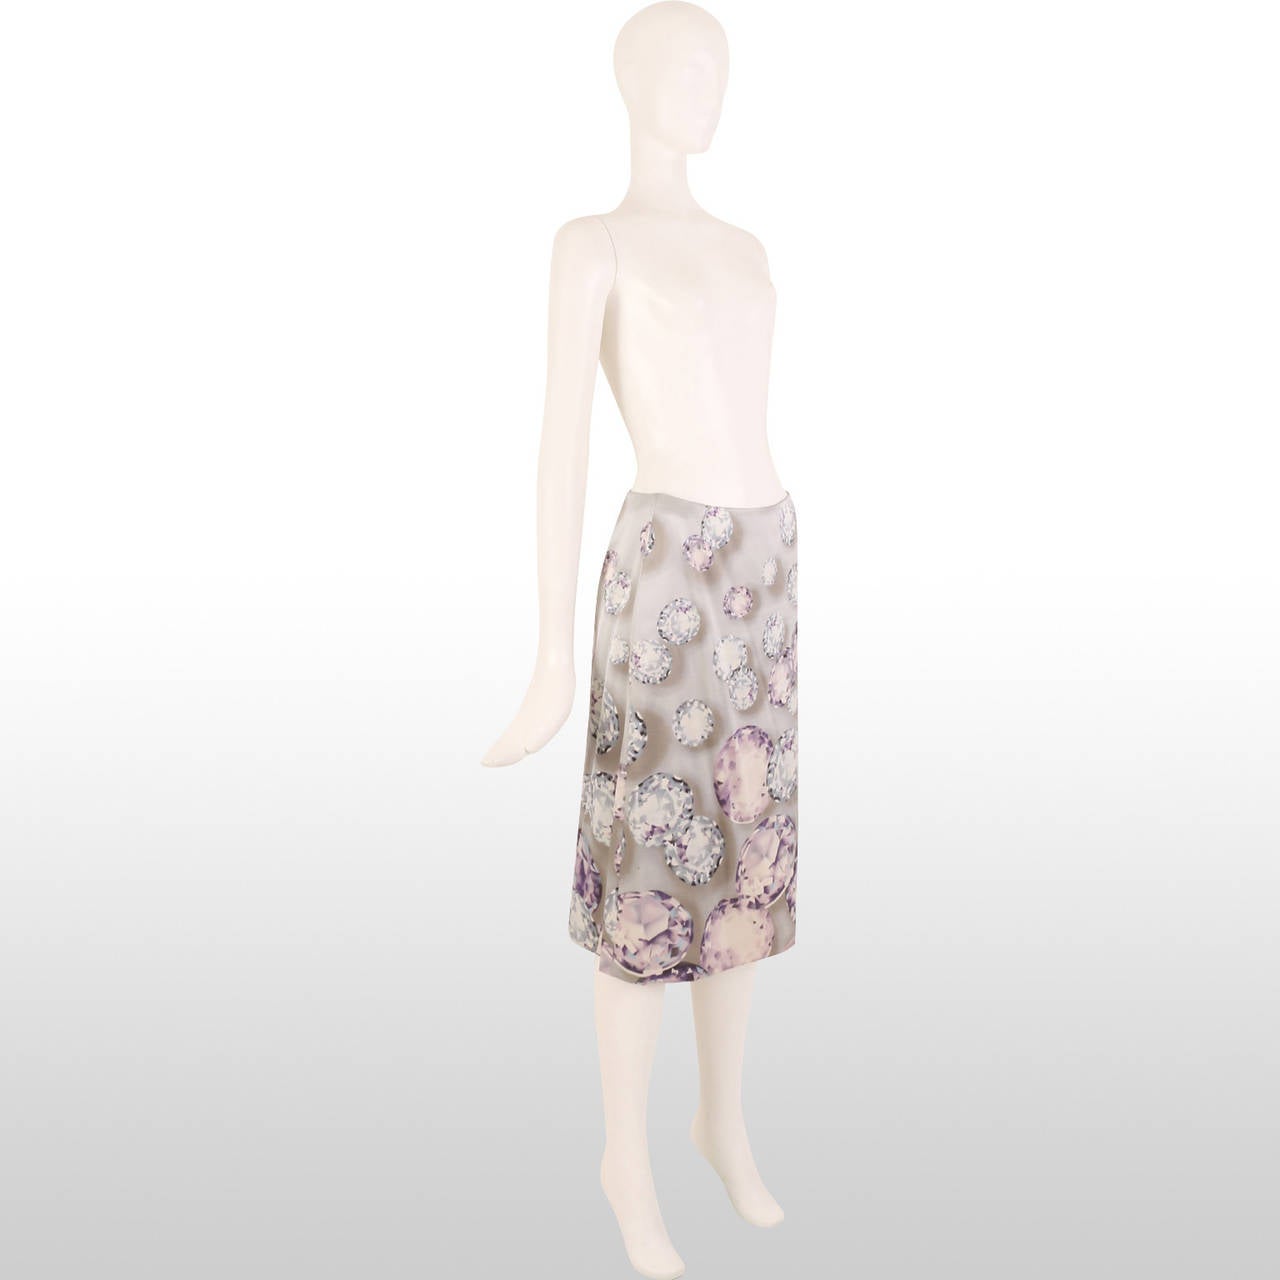 This beautiful Versace skirt has a gorgeous blush pink and blue gem print that makes it both elegant and delicate. Can be worn during the day time with a light grey knitted jumper but also works beautifully styled up for a cocktail party. Remains in